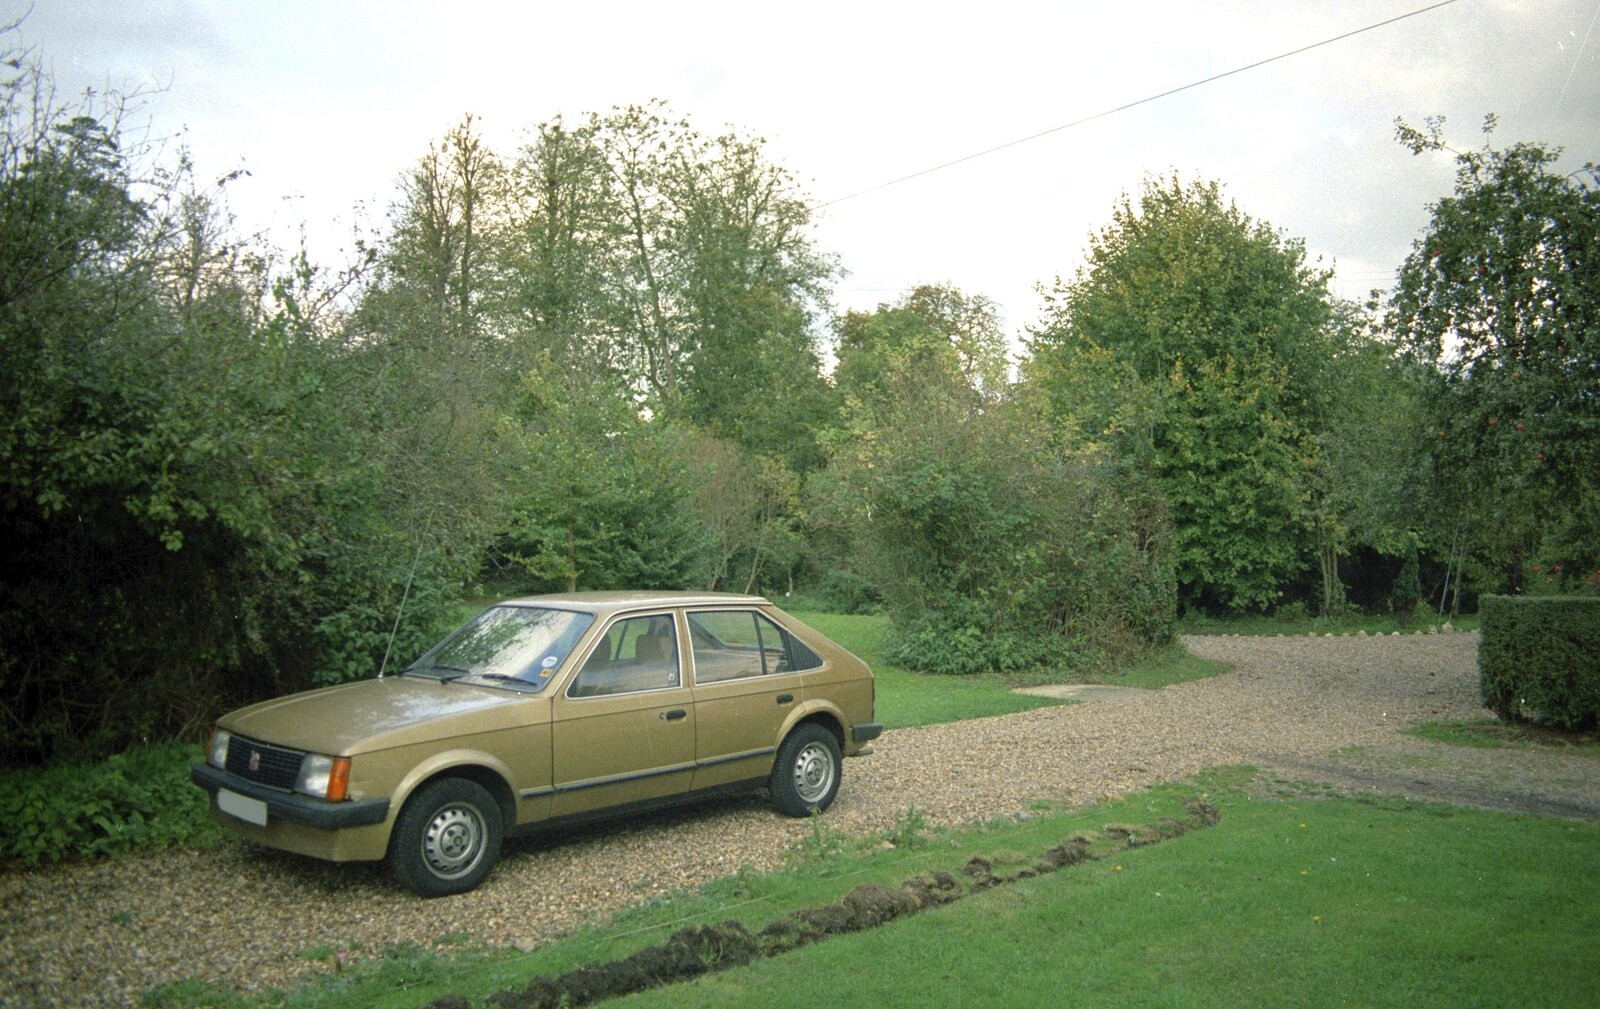 Nosher's beloved Mark 1 Astra from Bromestock 1 and a Mortlock Barbeque, Brome and Thrandeston, Suffolk - 24th June 1997